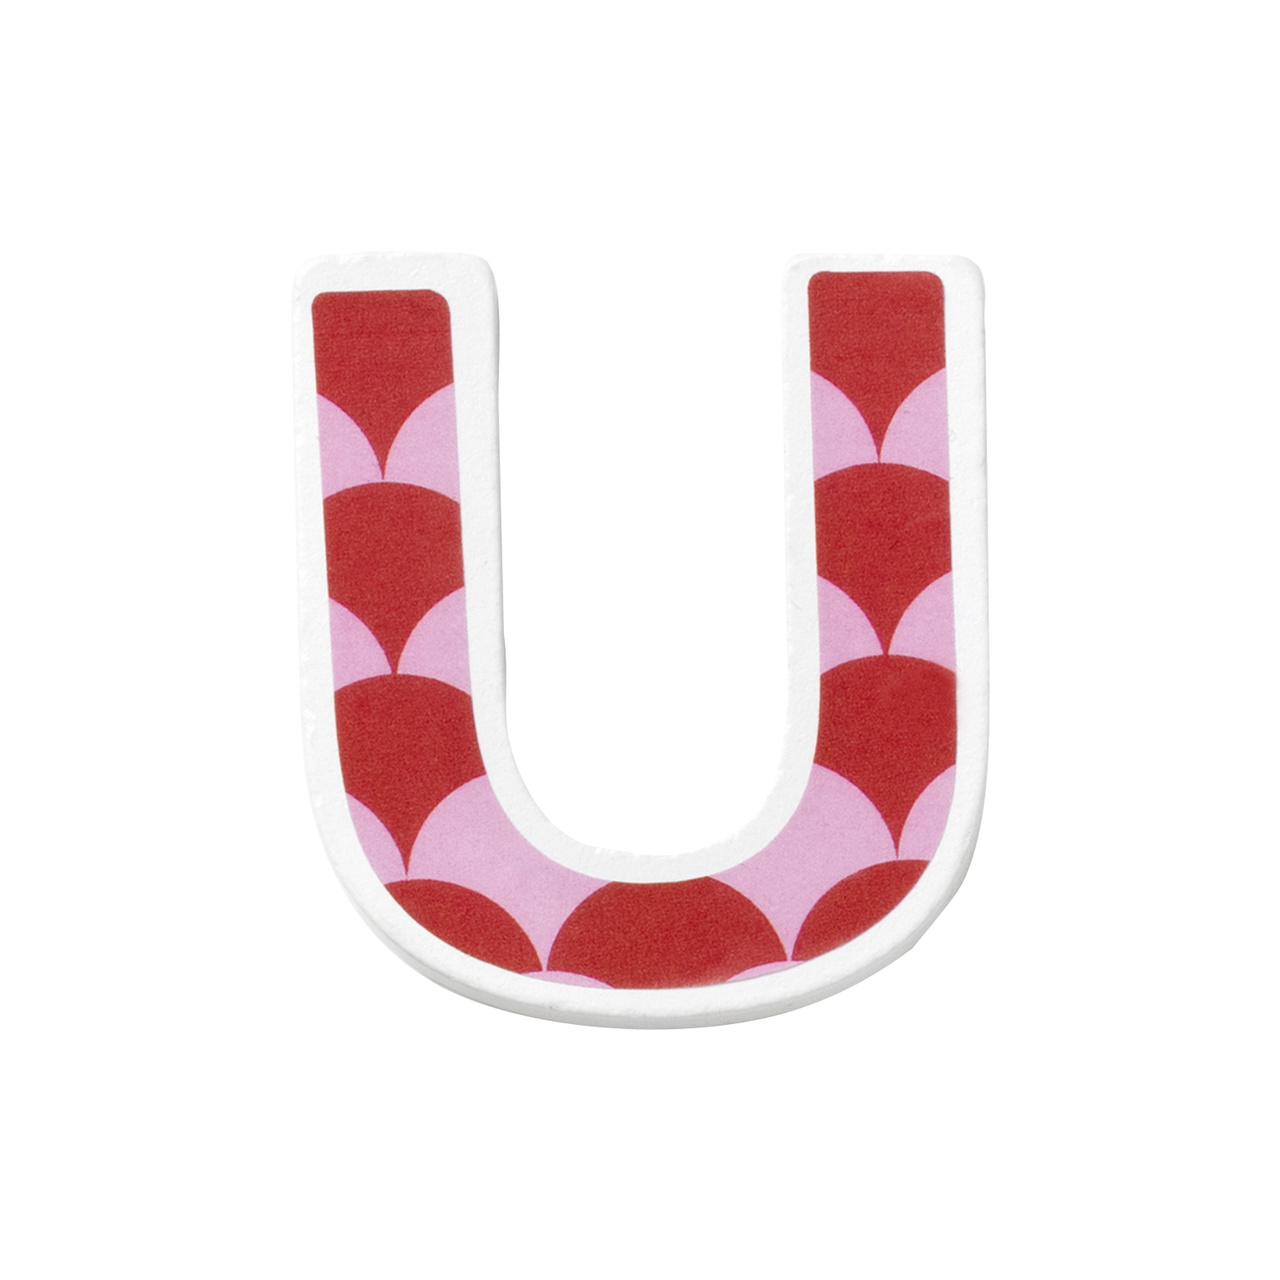 Letters & numbers micki u - decorative letter & mix and match stickers